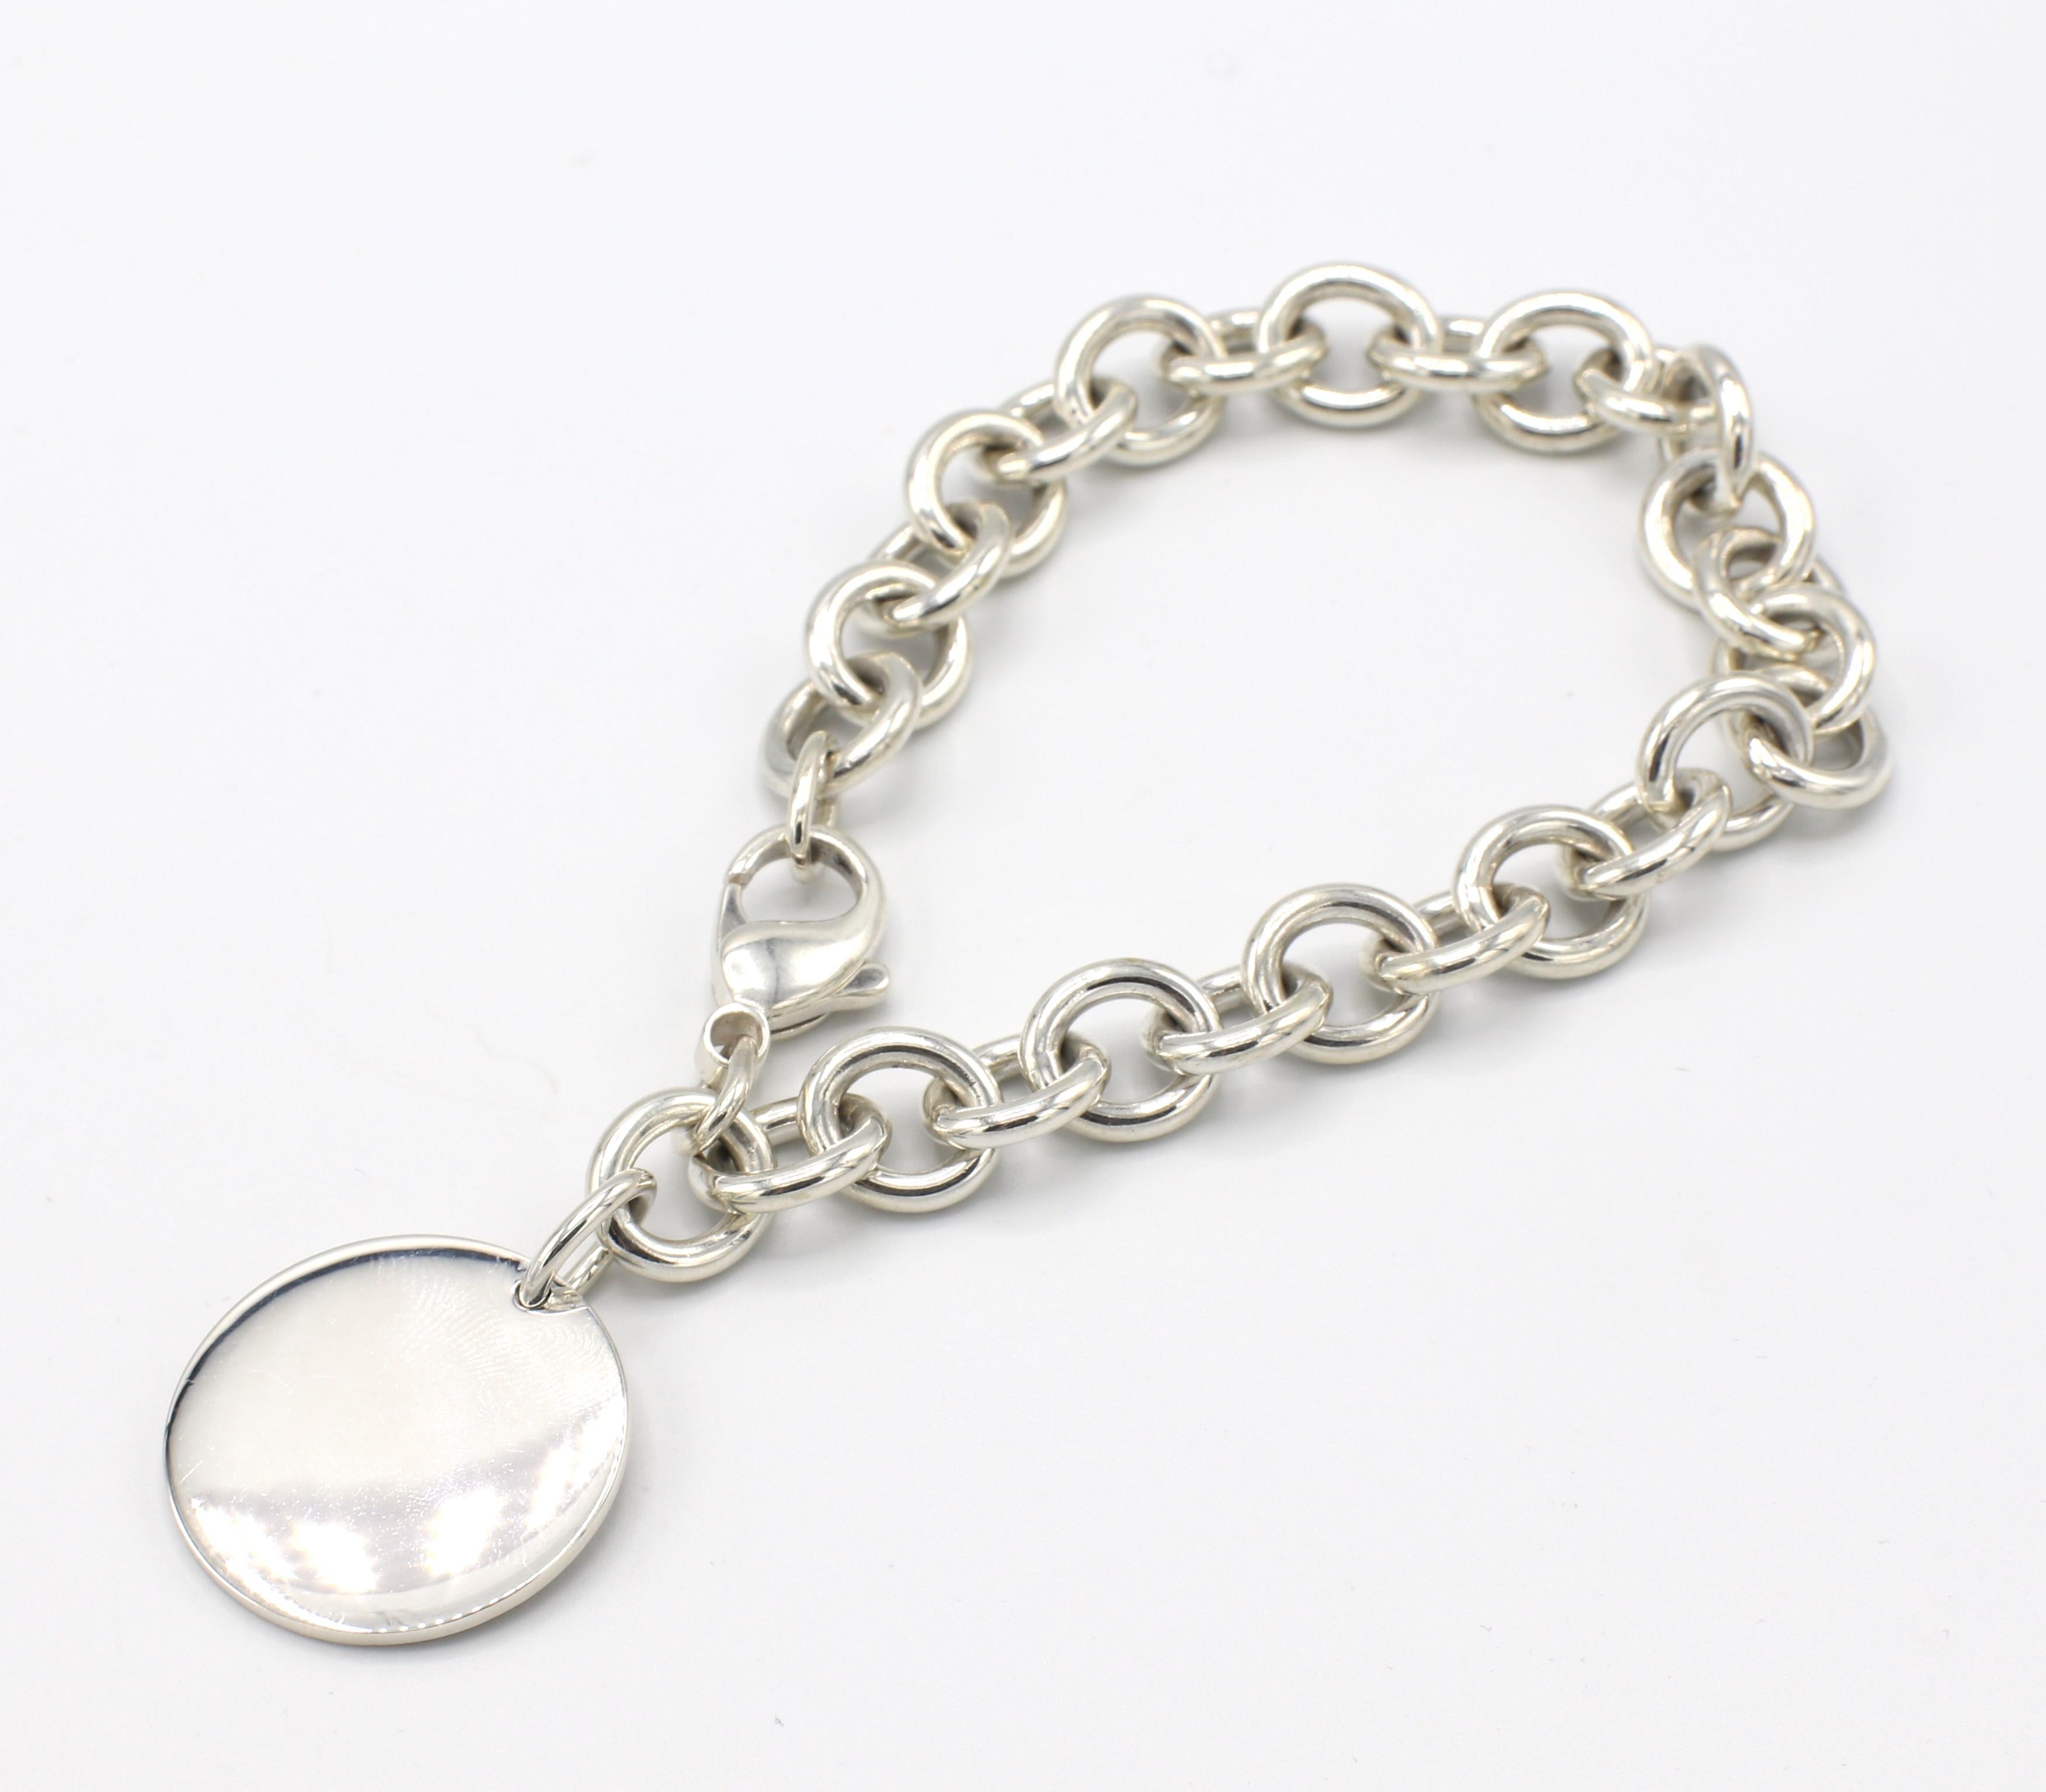 Tiffany & Co. Sterling Silver Return to Tiffany Round Charm Tag Link Bracelet 
Metal: Sterling silver
Weight: 37.8 grams
Length: 8 inches
Charm diameter: 24mm
Signed: Please Return To Tiffany & Co. New York 925
